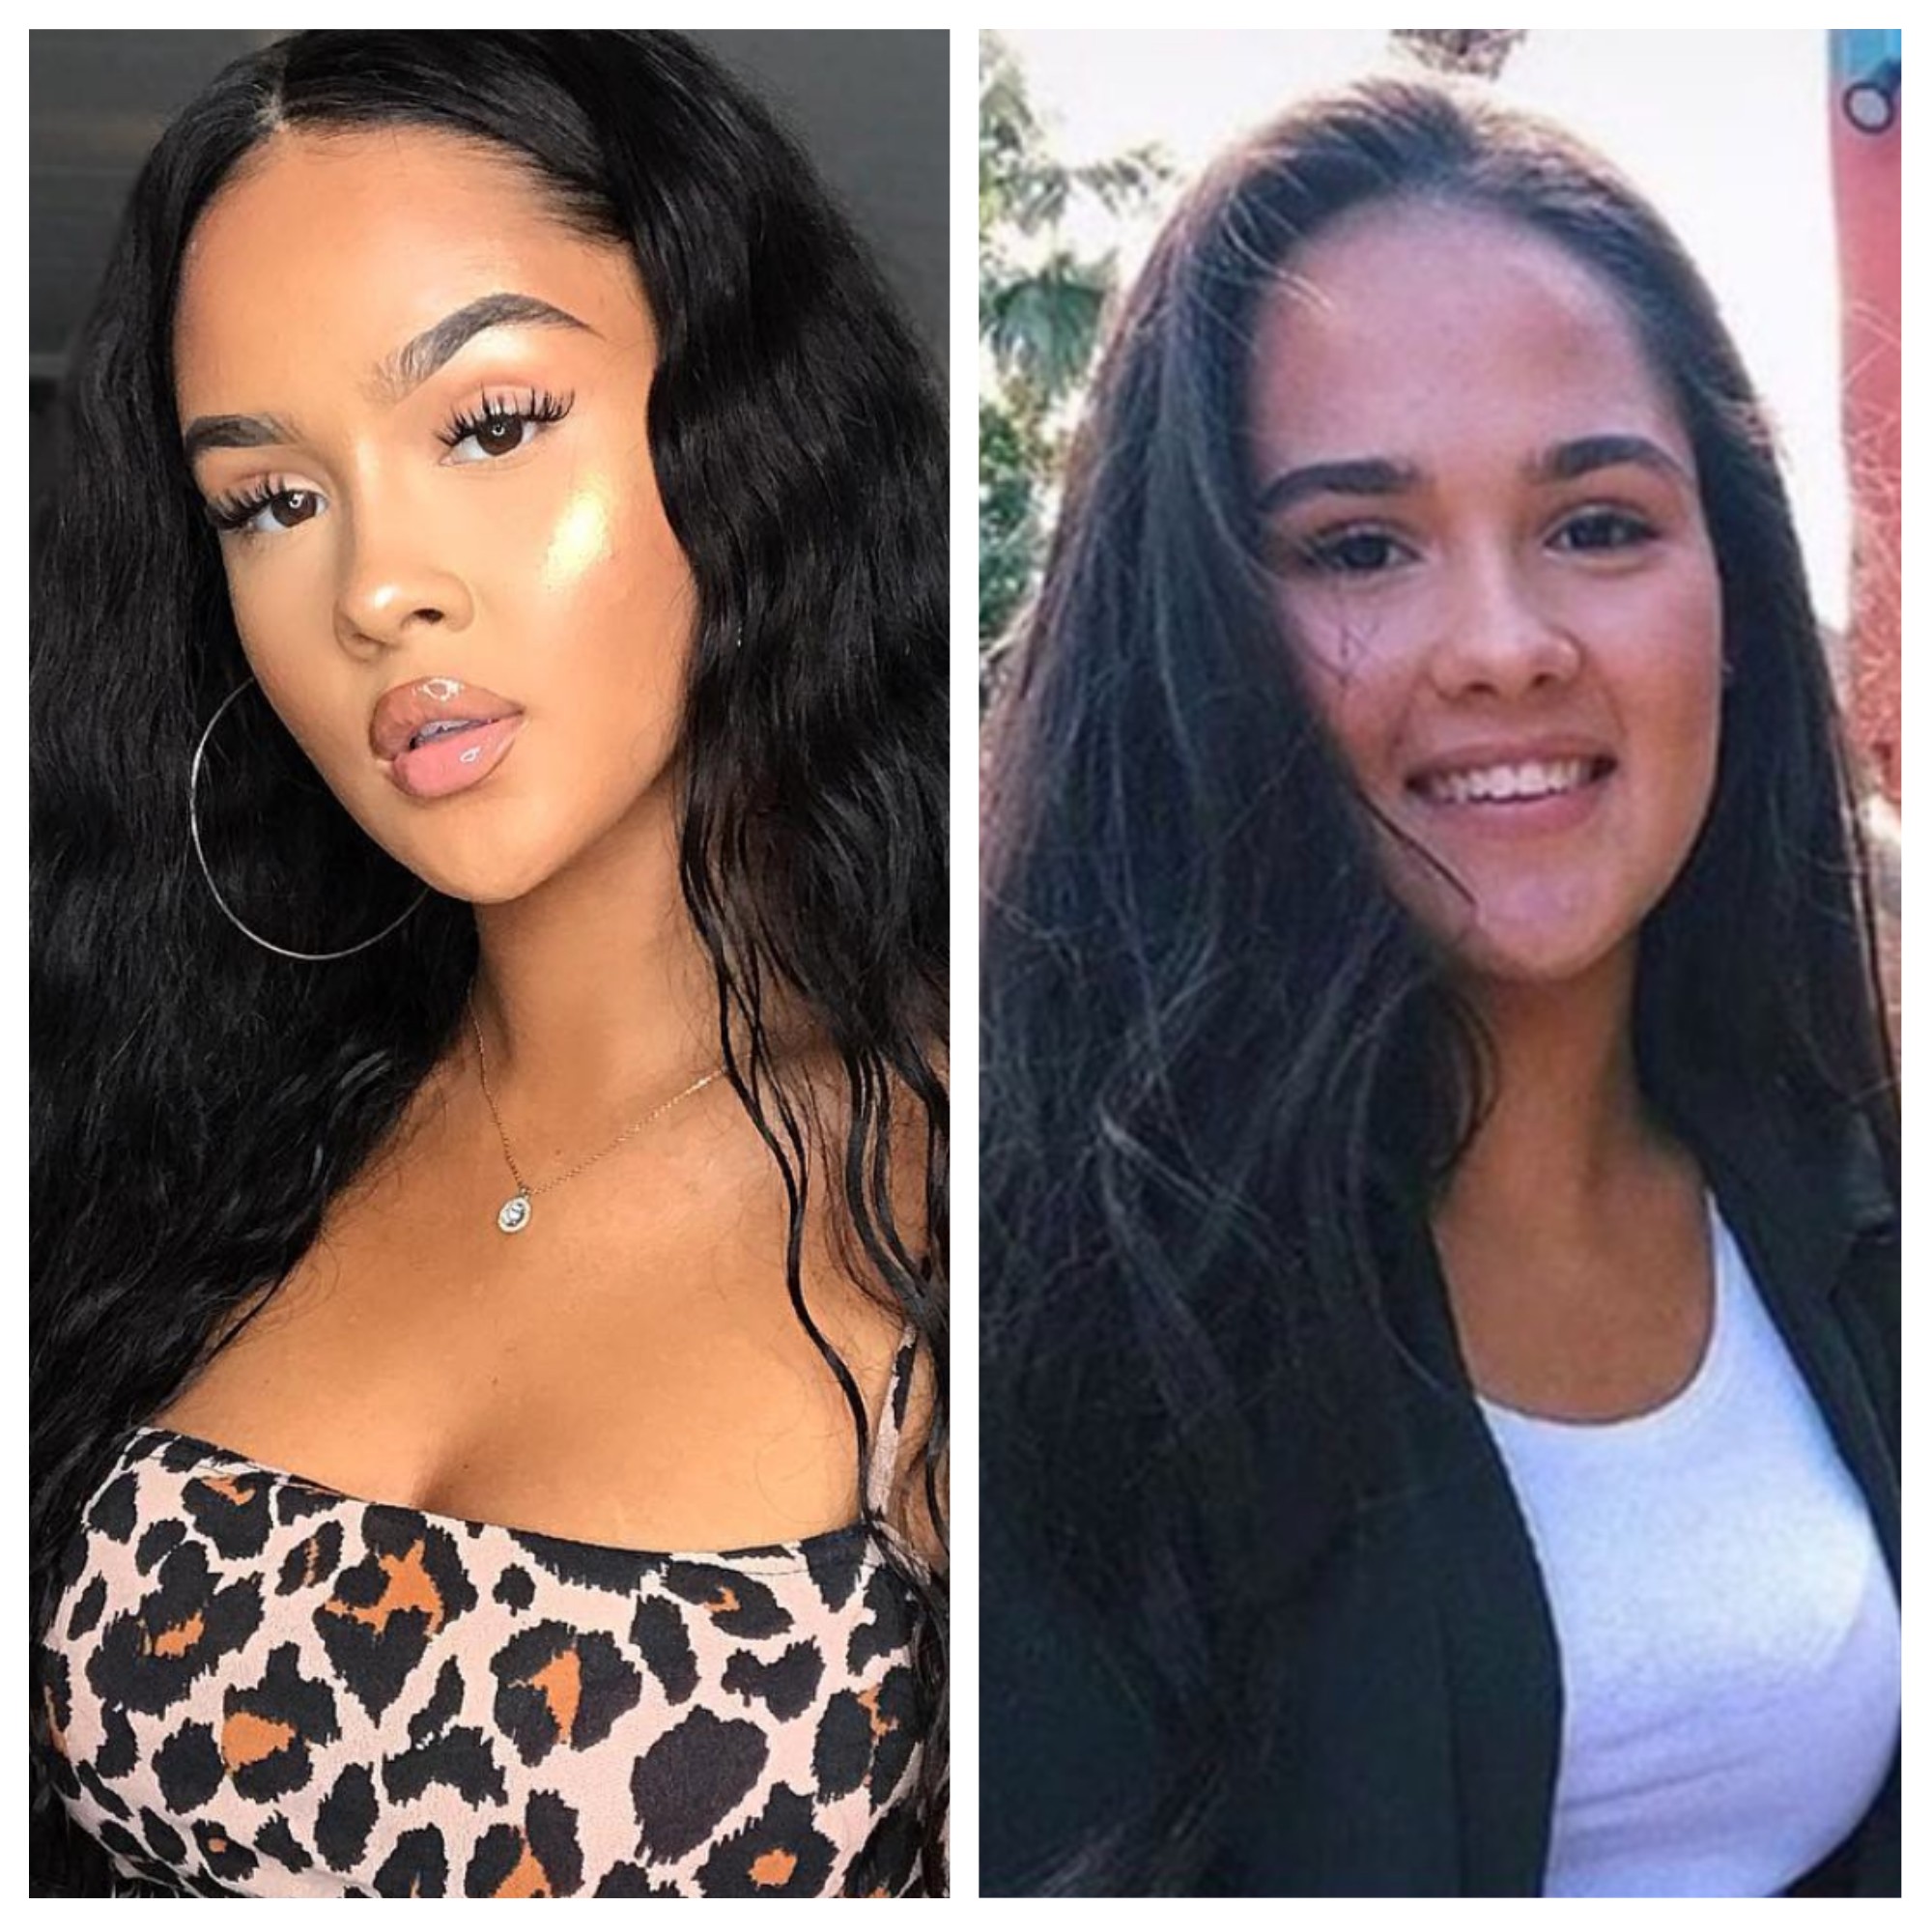 Black Instagram influencers call out 'blackfishing' white women for racial  appropriation